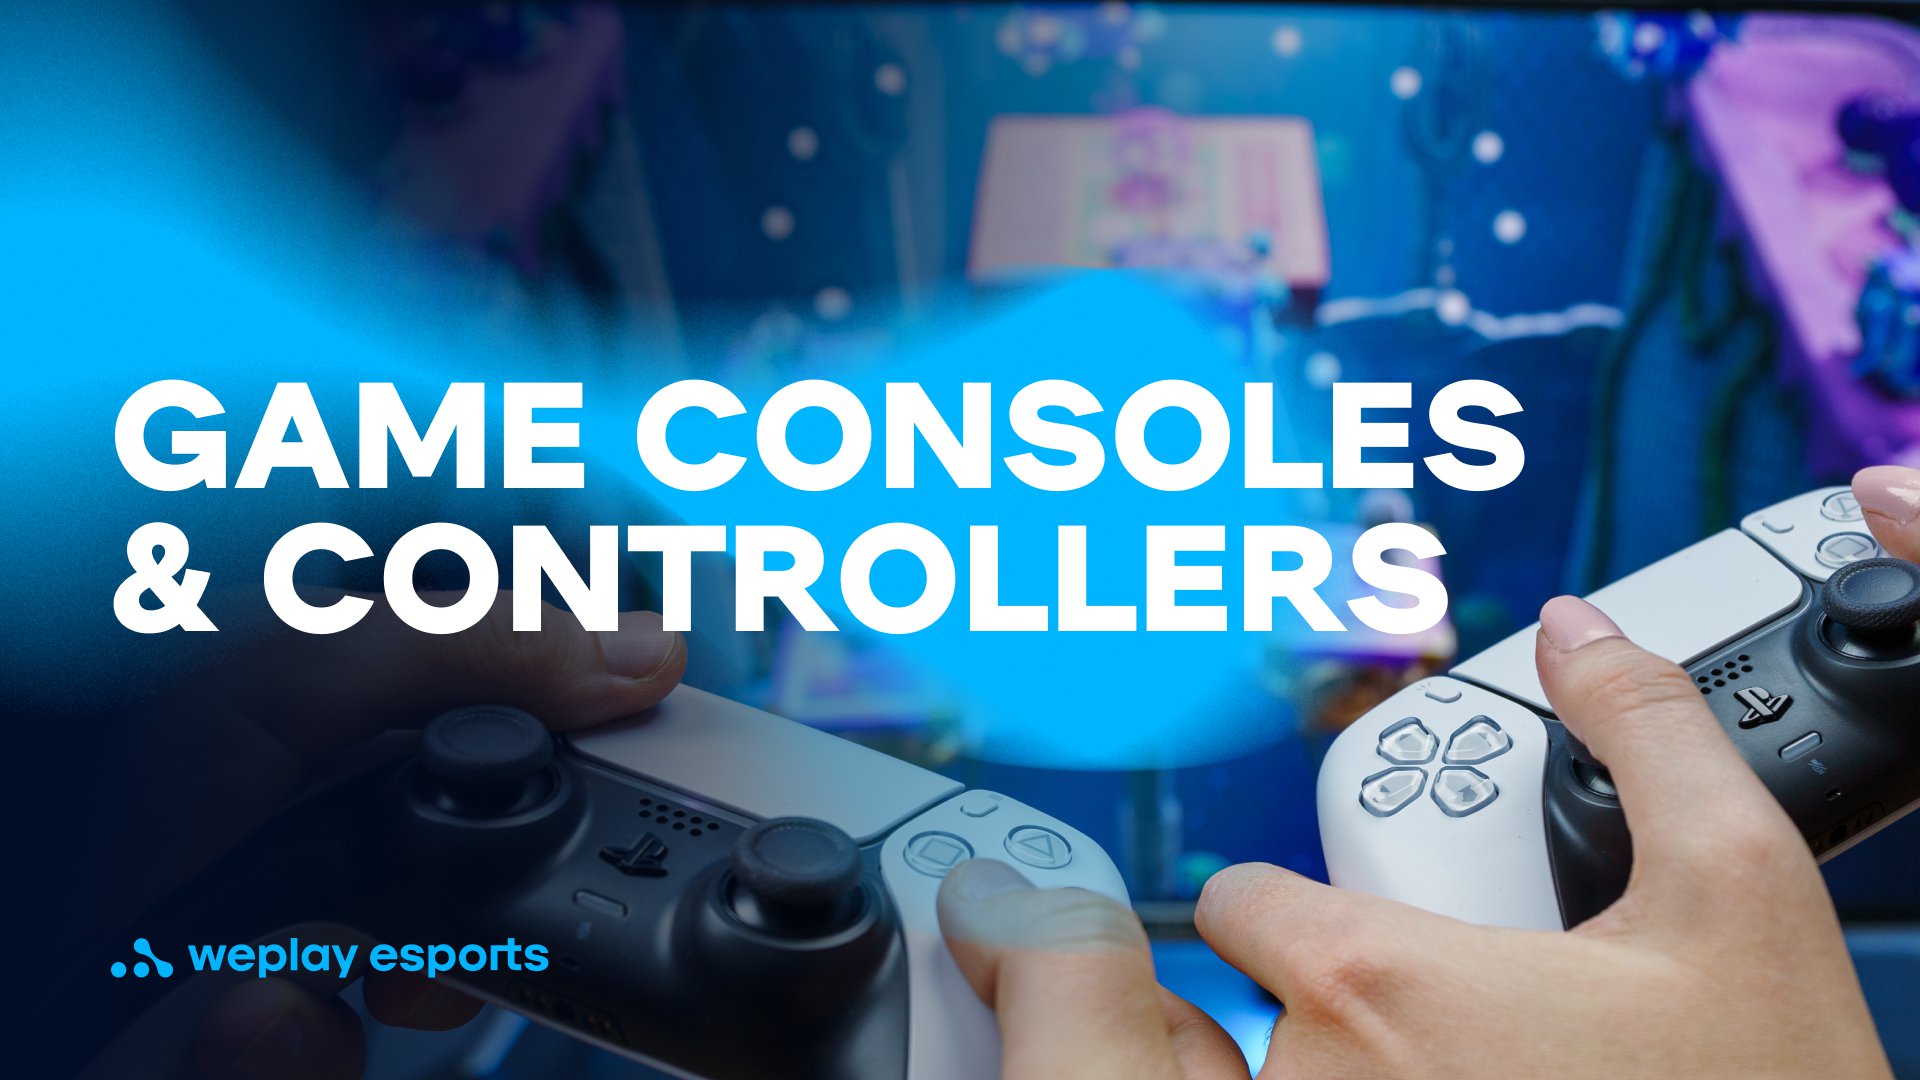 Game consoles and controllers. Credit: WePlay Holding